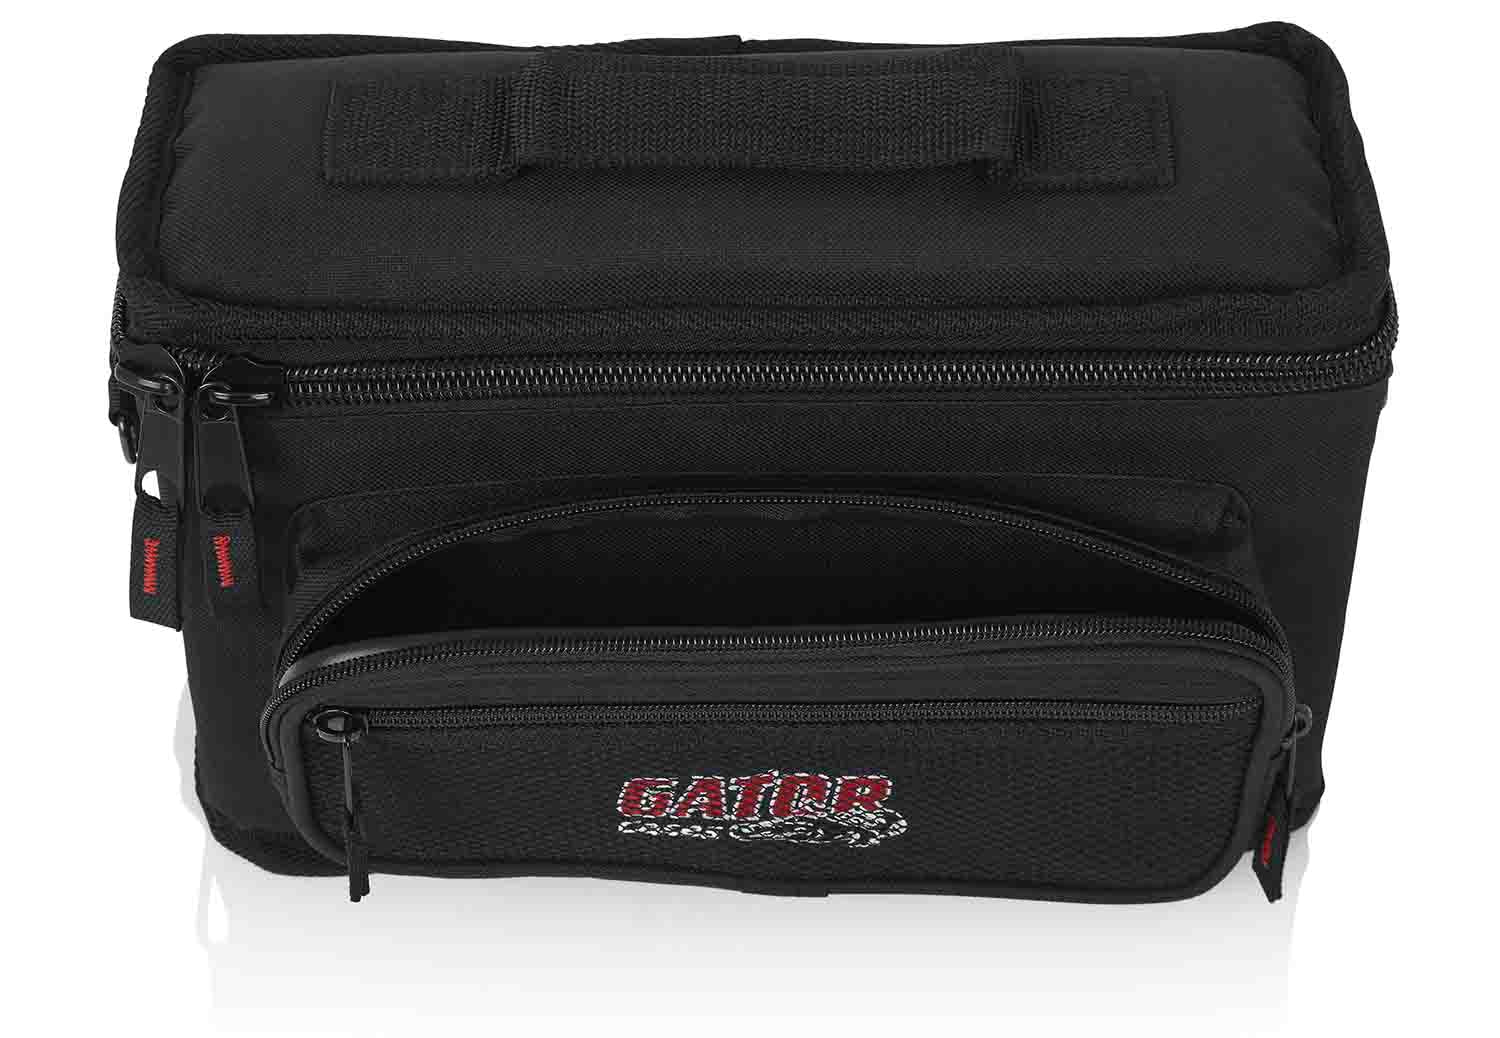 Gator Cases GM-4 DJ Bag for 4 Microphones with Exterior Pockets for Cables - Hollywood DJ